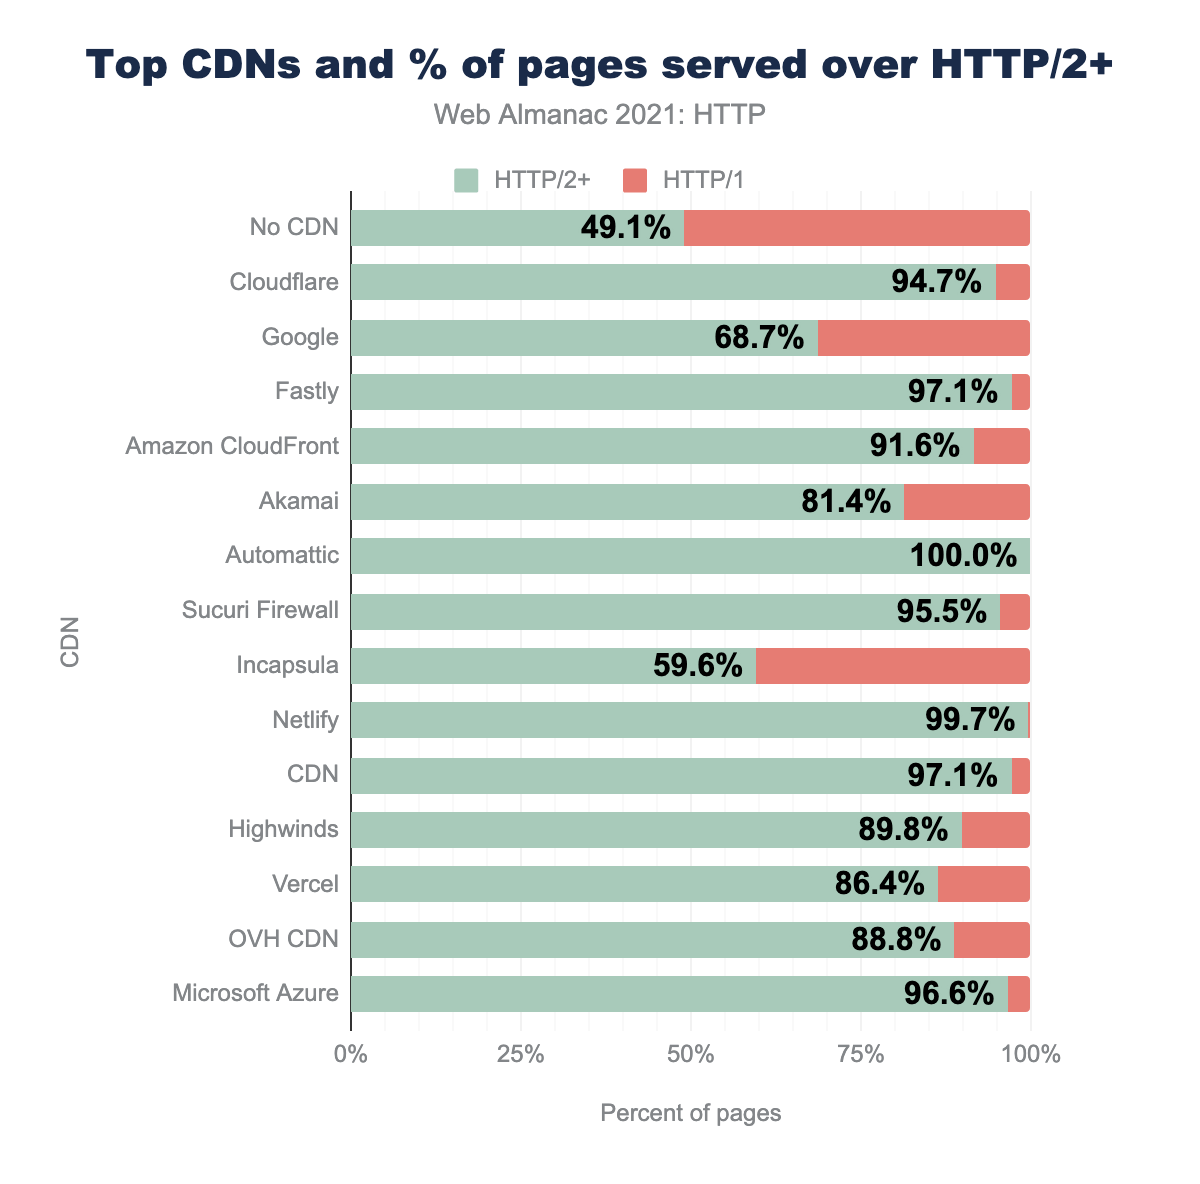 Top CDNs and % of pages served over HTTP/2+.